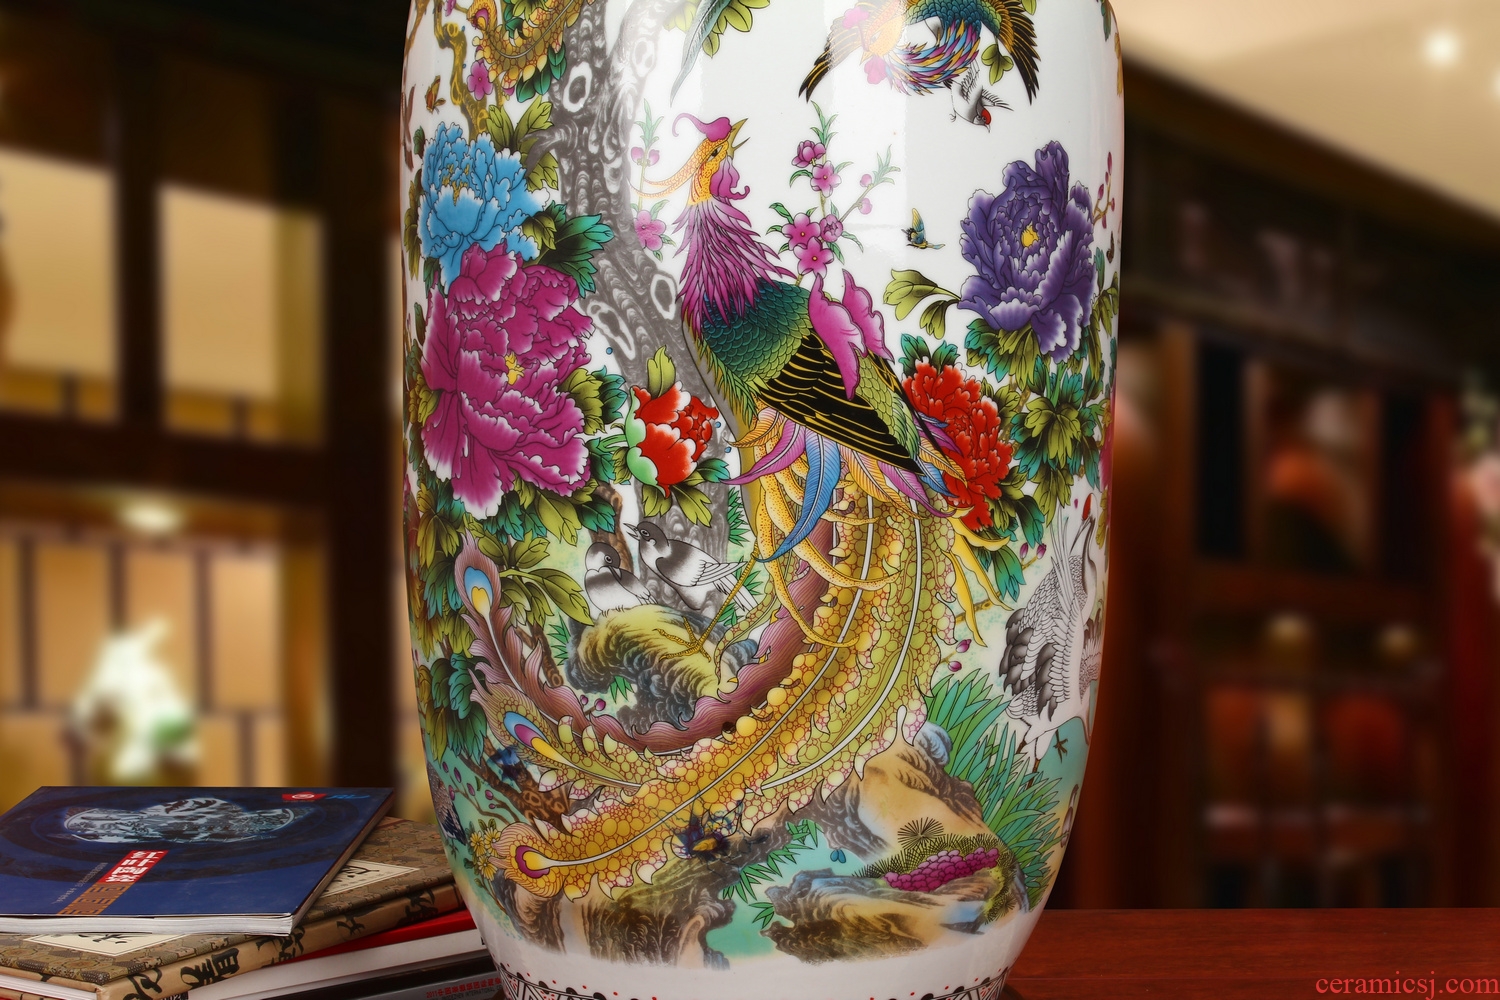 Idea for gourd jingdezhen ceramics powder enamel birds pay homage to the king of large vases, modern Chinese style household crafts